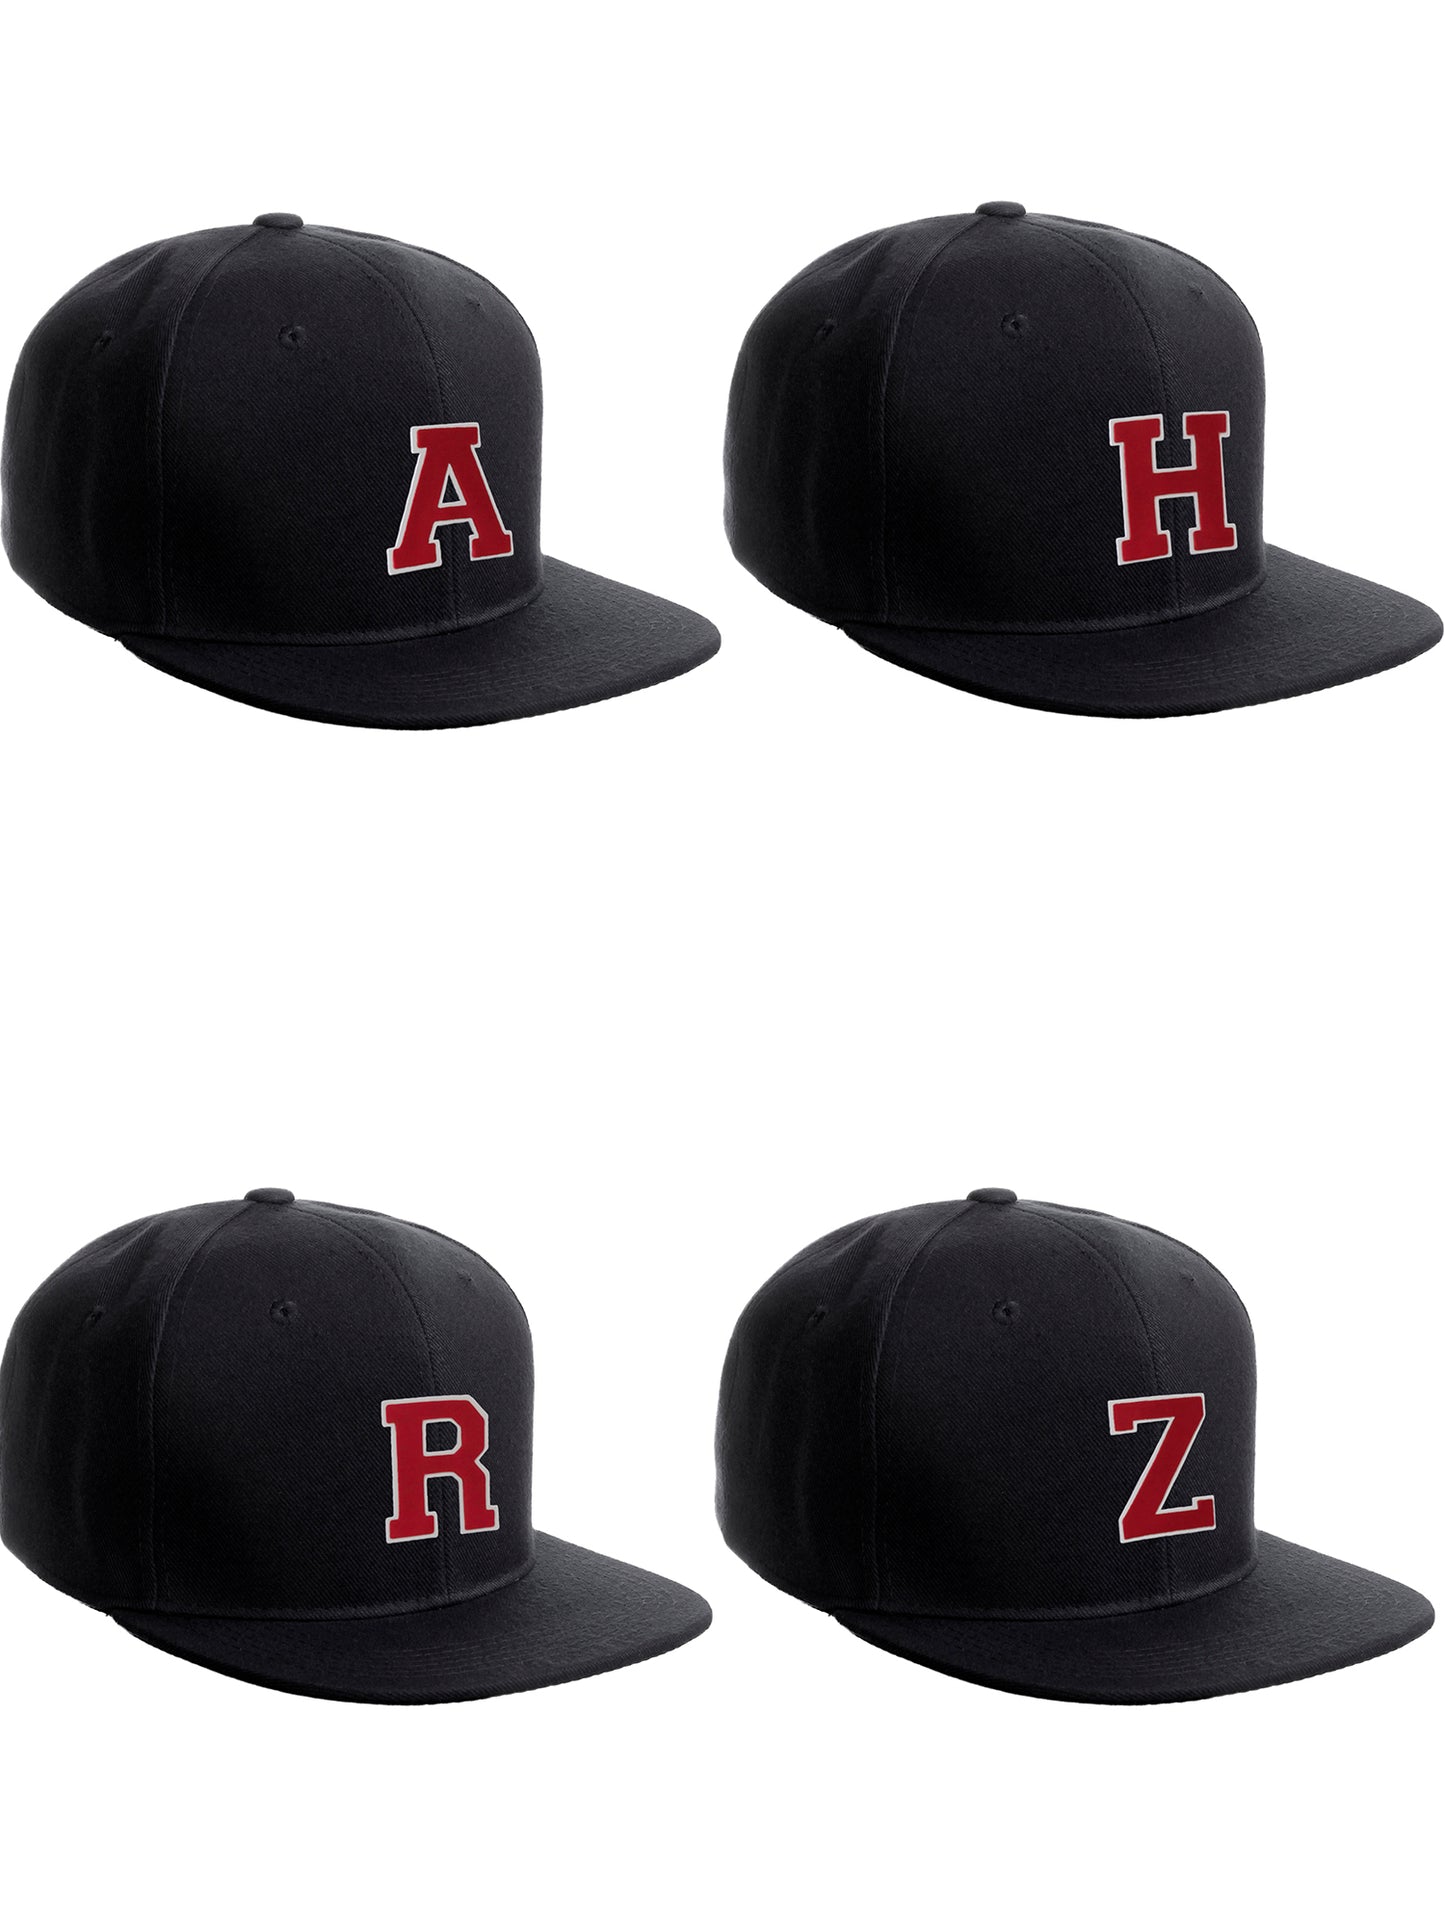 Classic Snapback Hat Custom A to Z Initial Raised Letters, Black Cap White Red